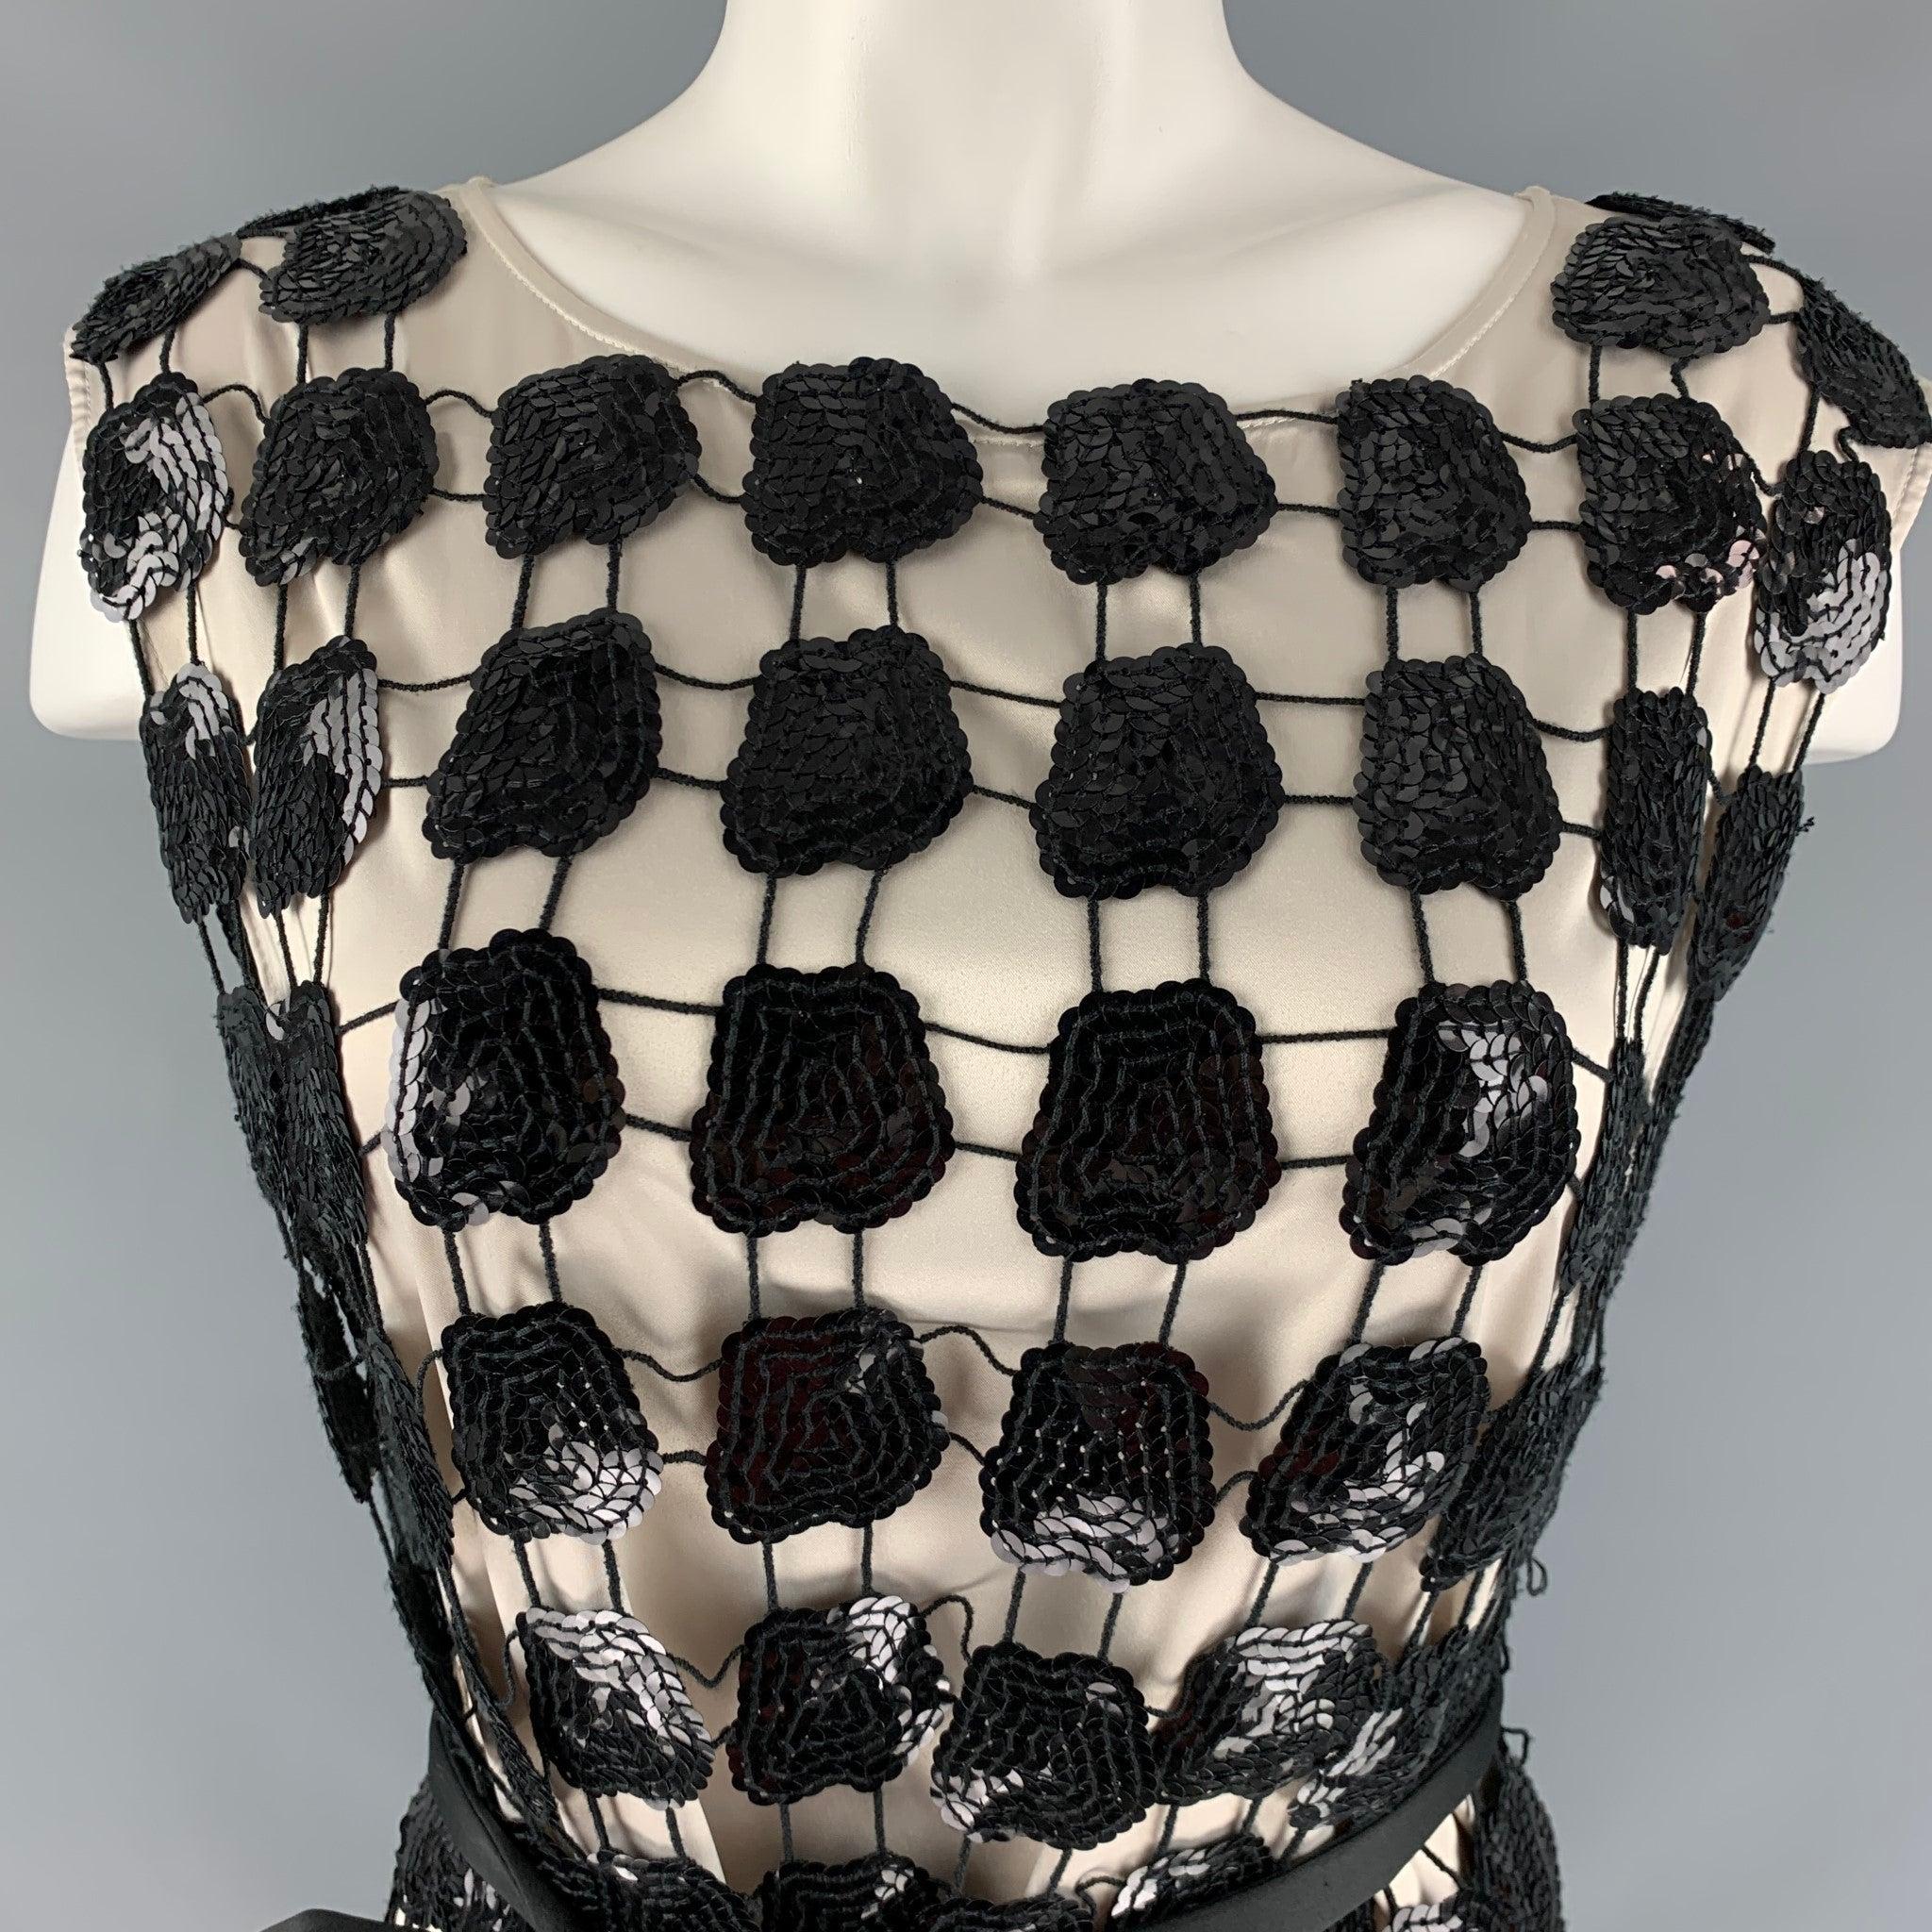 EMPORIO ARMANI cocktail dress in a cream polyester fabric featuring all over checkered sequin overlay, tied belt, and crew neck.Very Good Pre-Owned Condition. Minor signs of wear. 

Marked:  40 

Measurements: 
 
Shoulder: 15 inches Bust: 33 inches